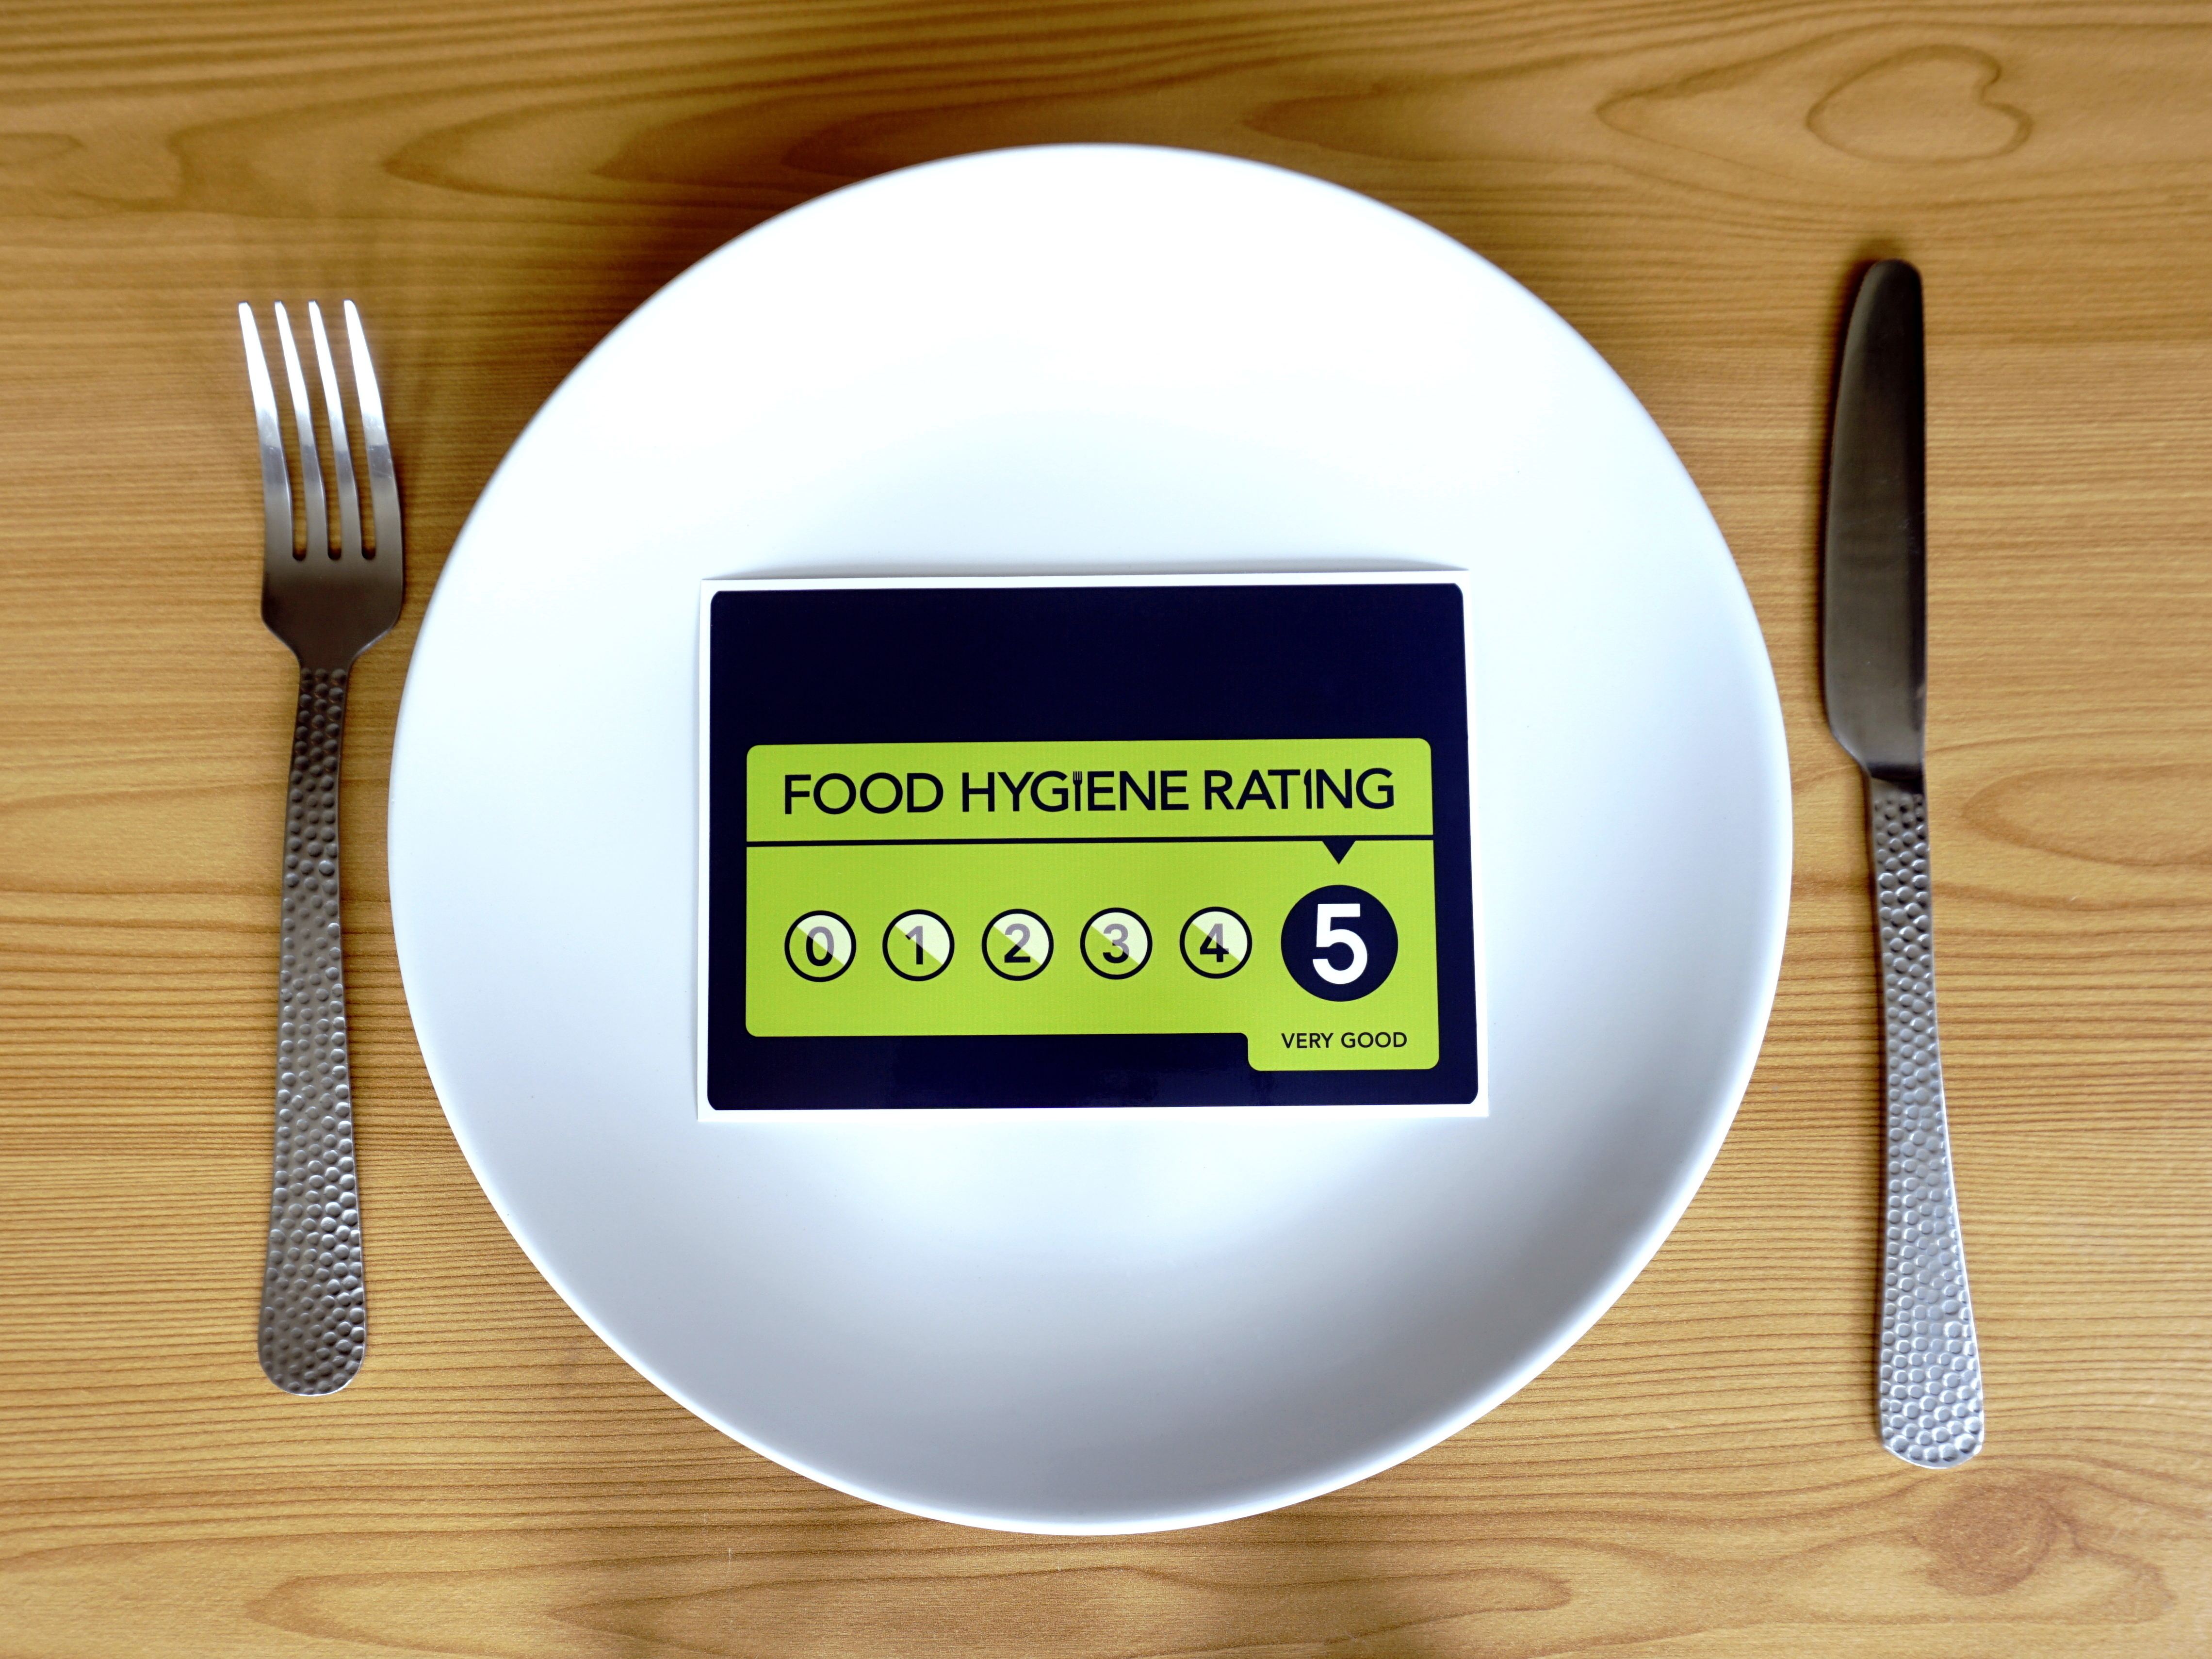 Food hygiene ratings for premises are reported to the public following inspections.